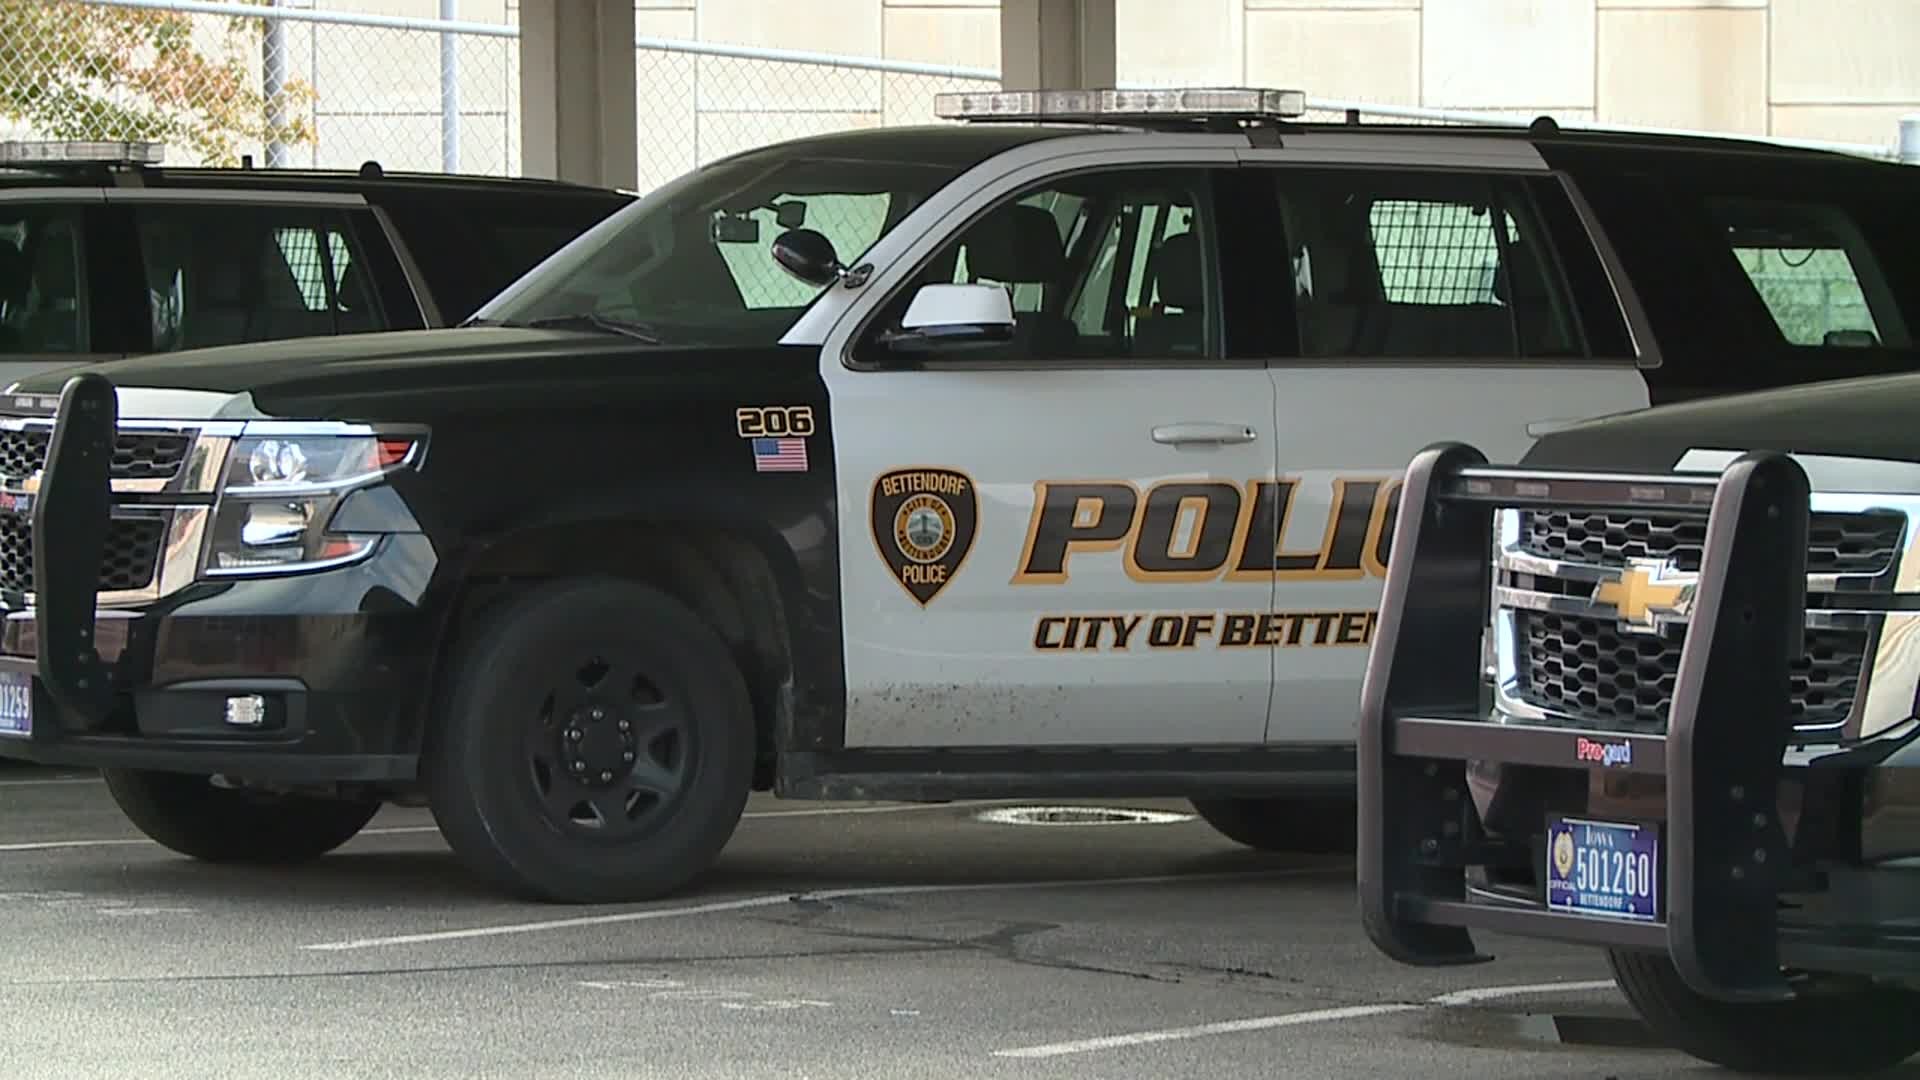 Bettendorf police raise awareness for breast cancer